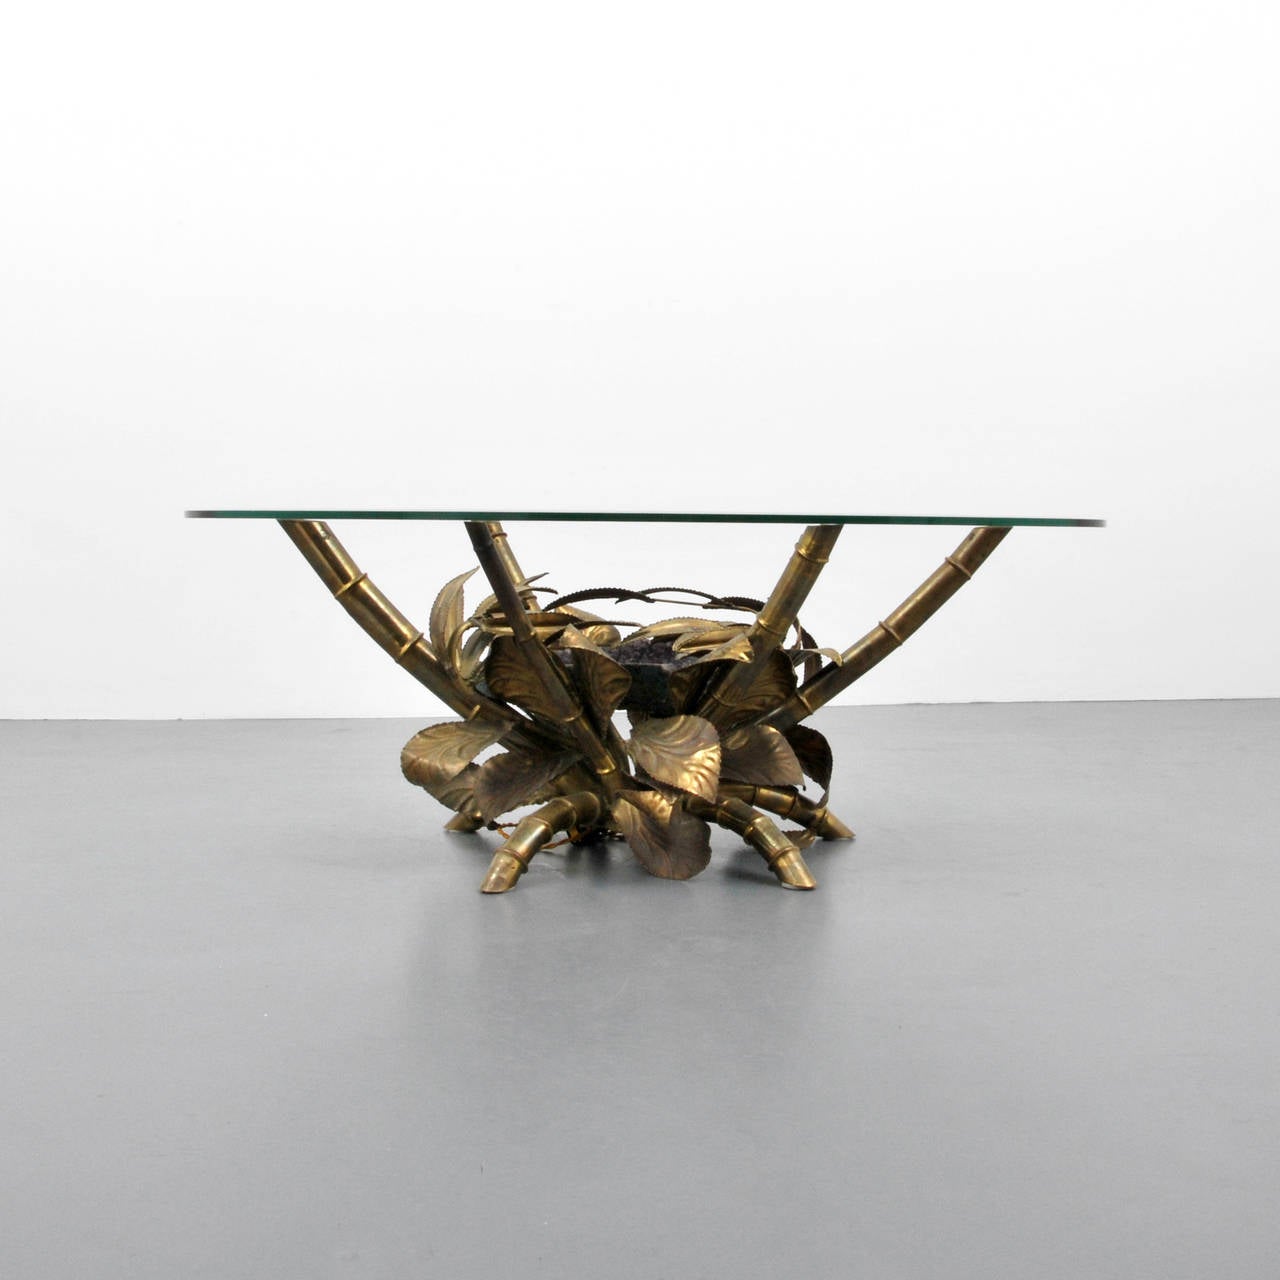 Lit French cocktail table with purple agate surrounded by brass leaves and bamboo by Christian Techoueyres and in the manner of Jacques Duval-Brasseur.